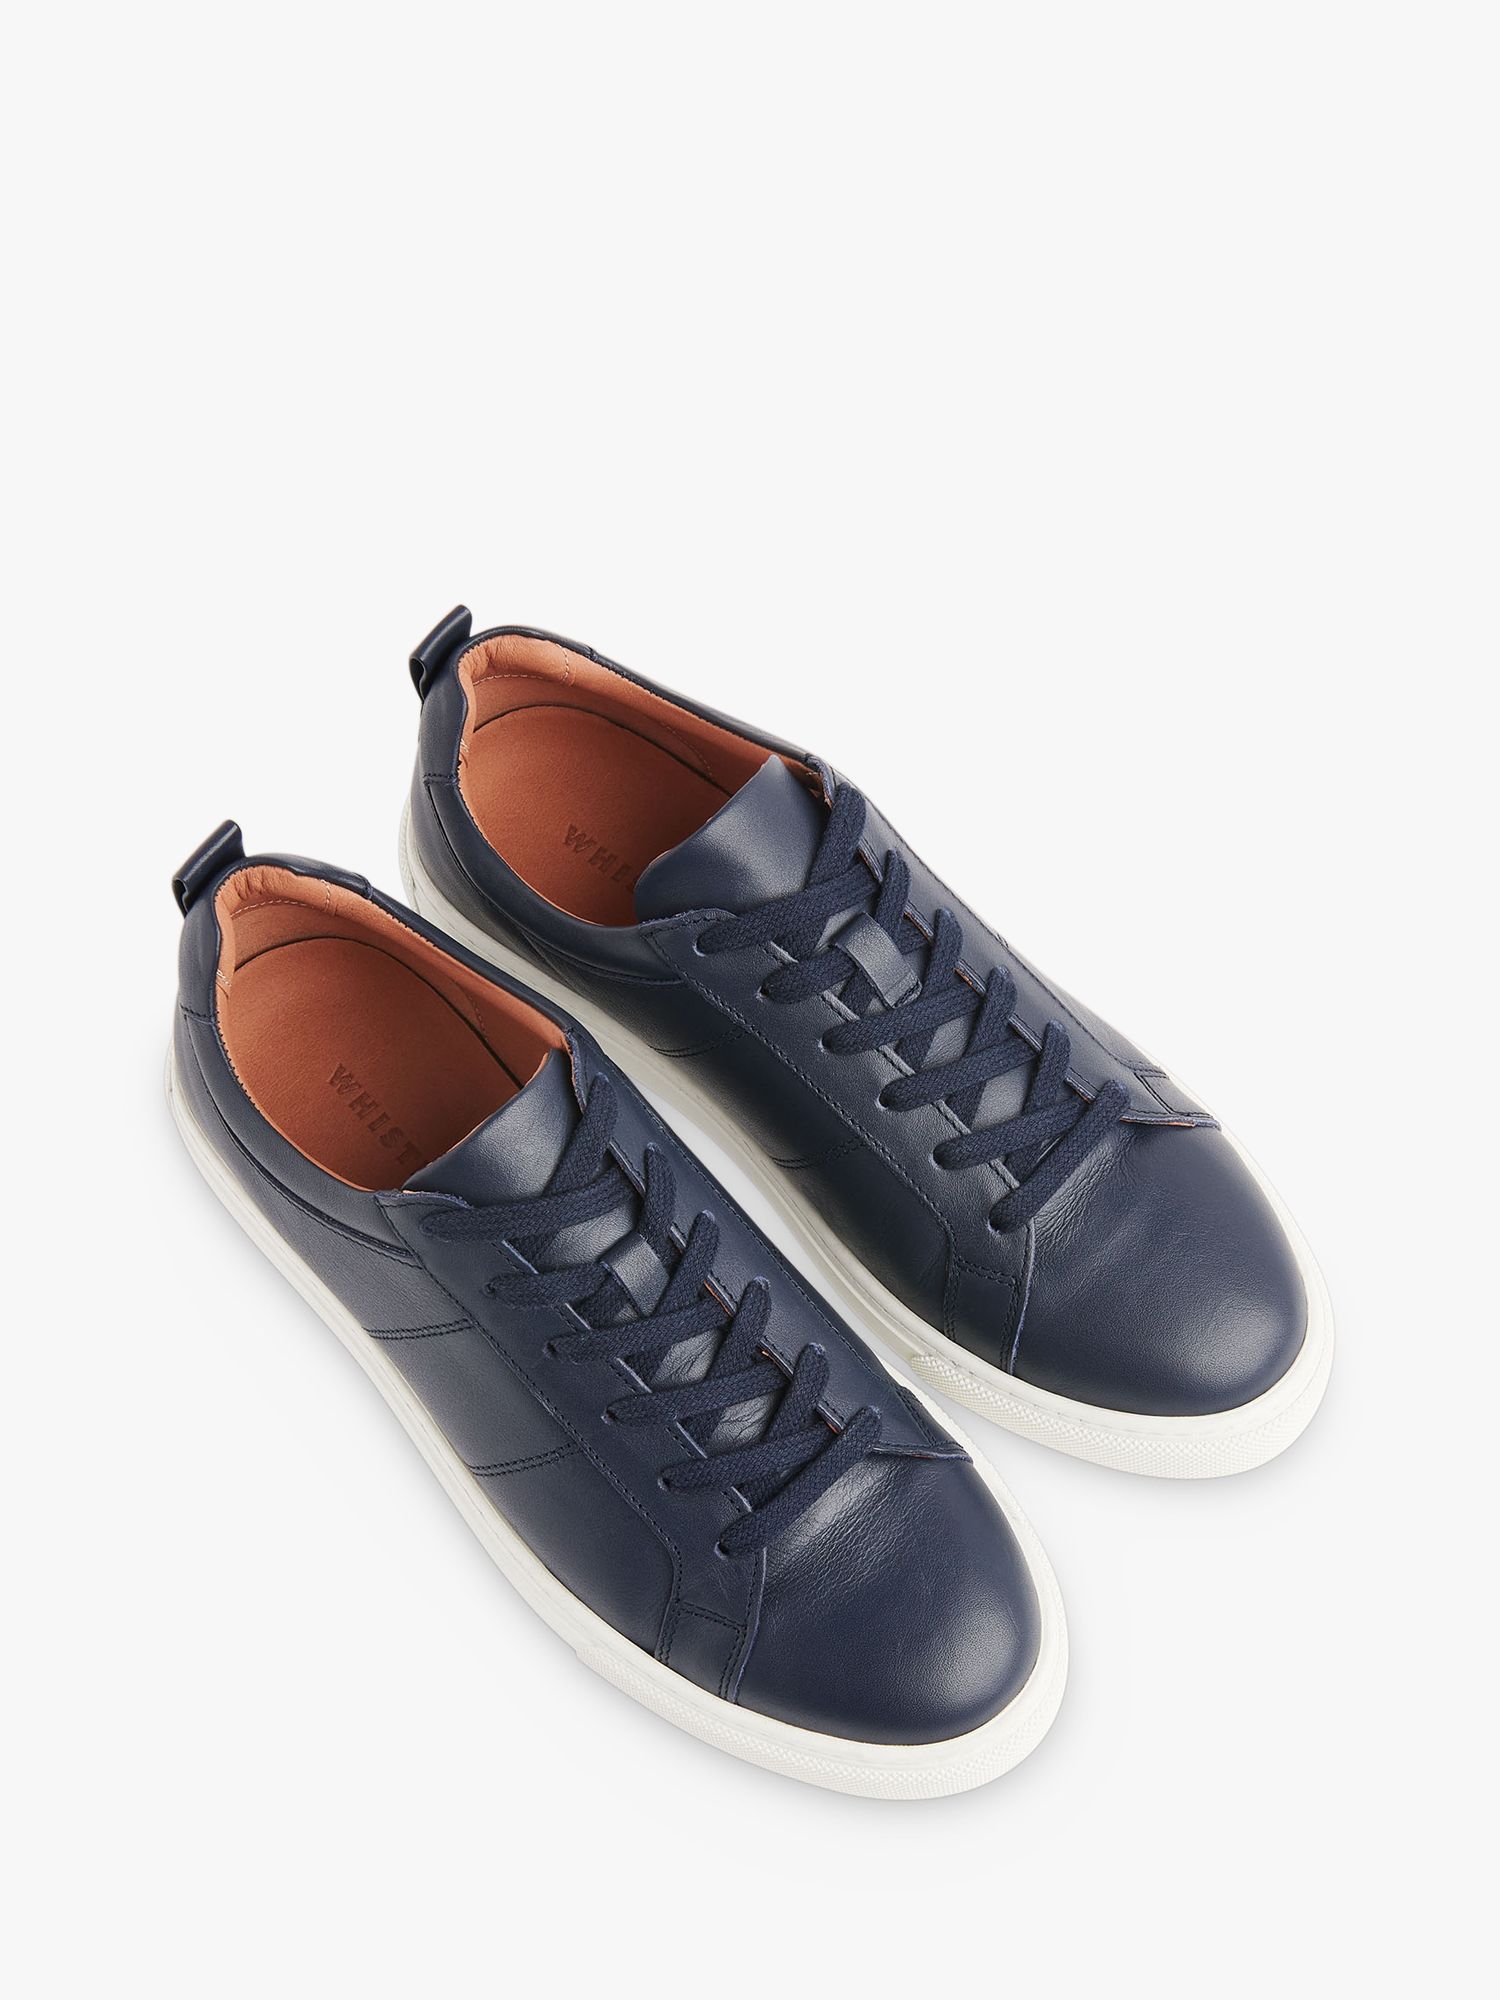 Whistles Koki Lace Up Leather Trainers, Navy at John Lewis & Partners